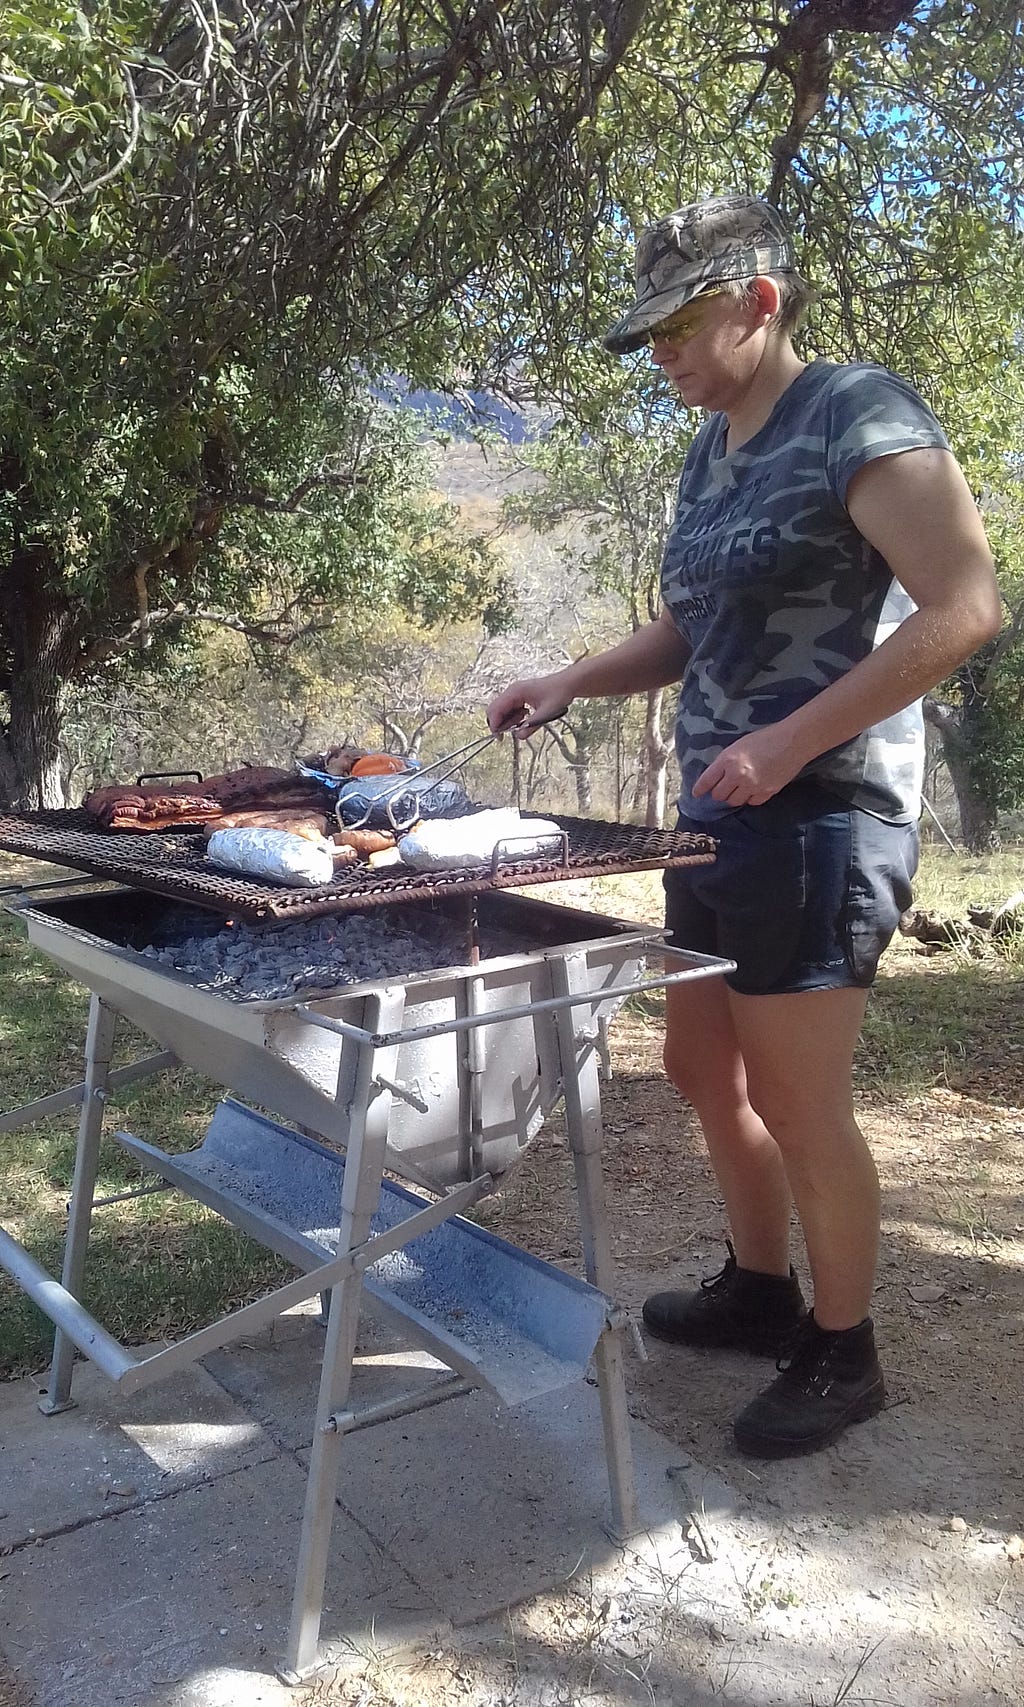 Author having a braai, with plenty of meat on the grill